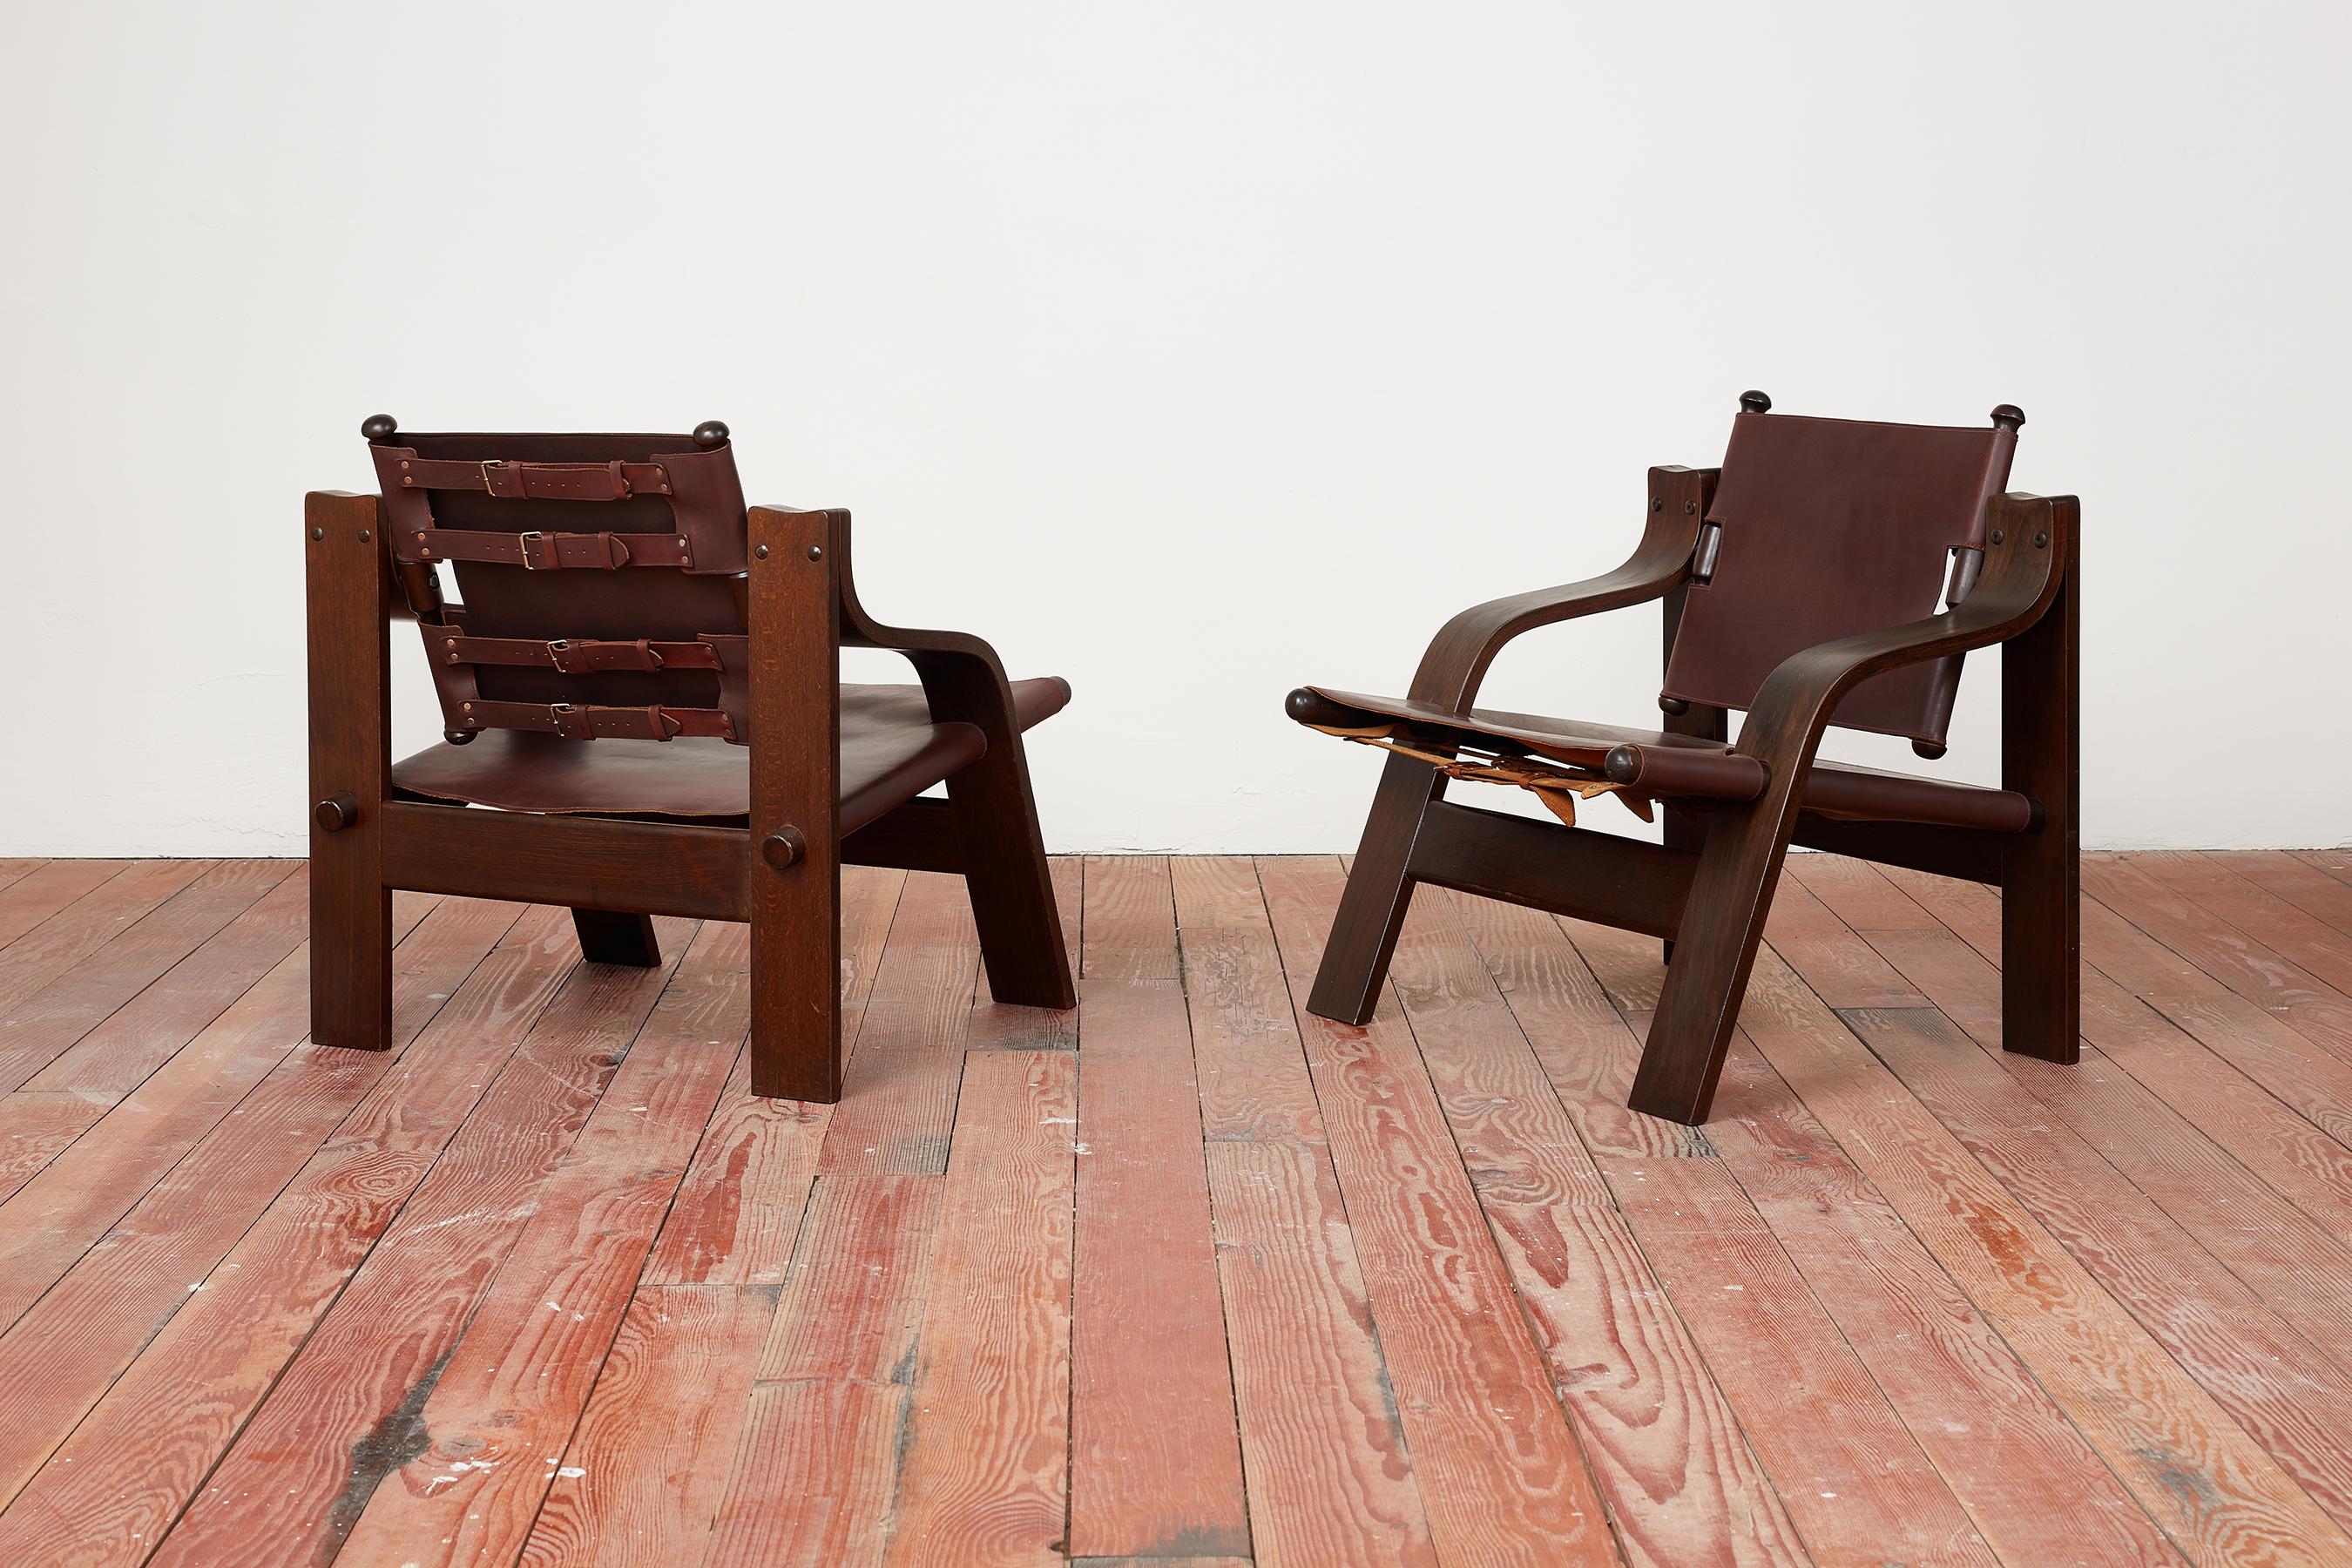 Handsome pair of French Leather Safari chairs 
Unique angular shape with deep chocolate burgundy colored leather 
Buckled detail in back - 
Professionally refinished and restored. 